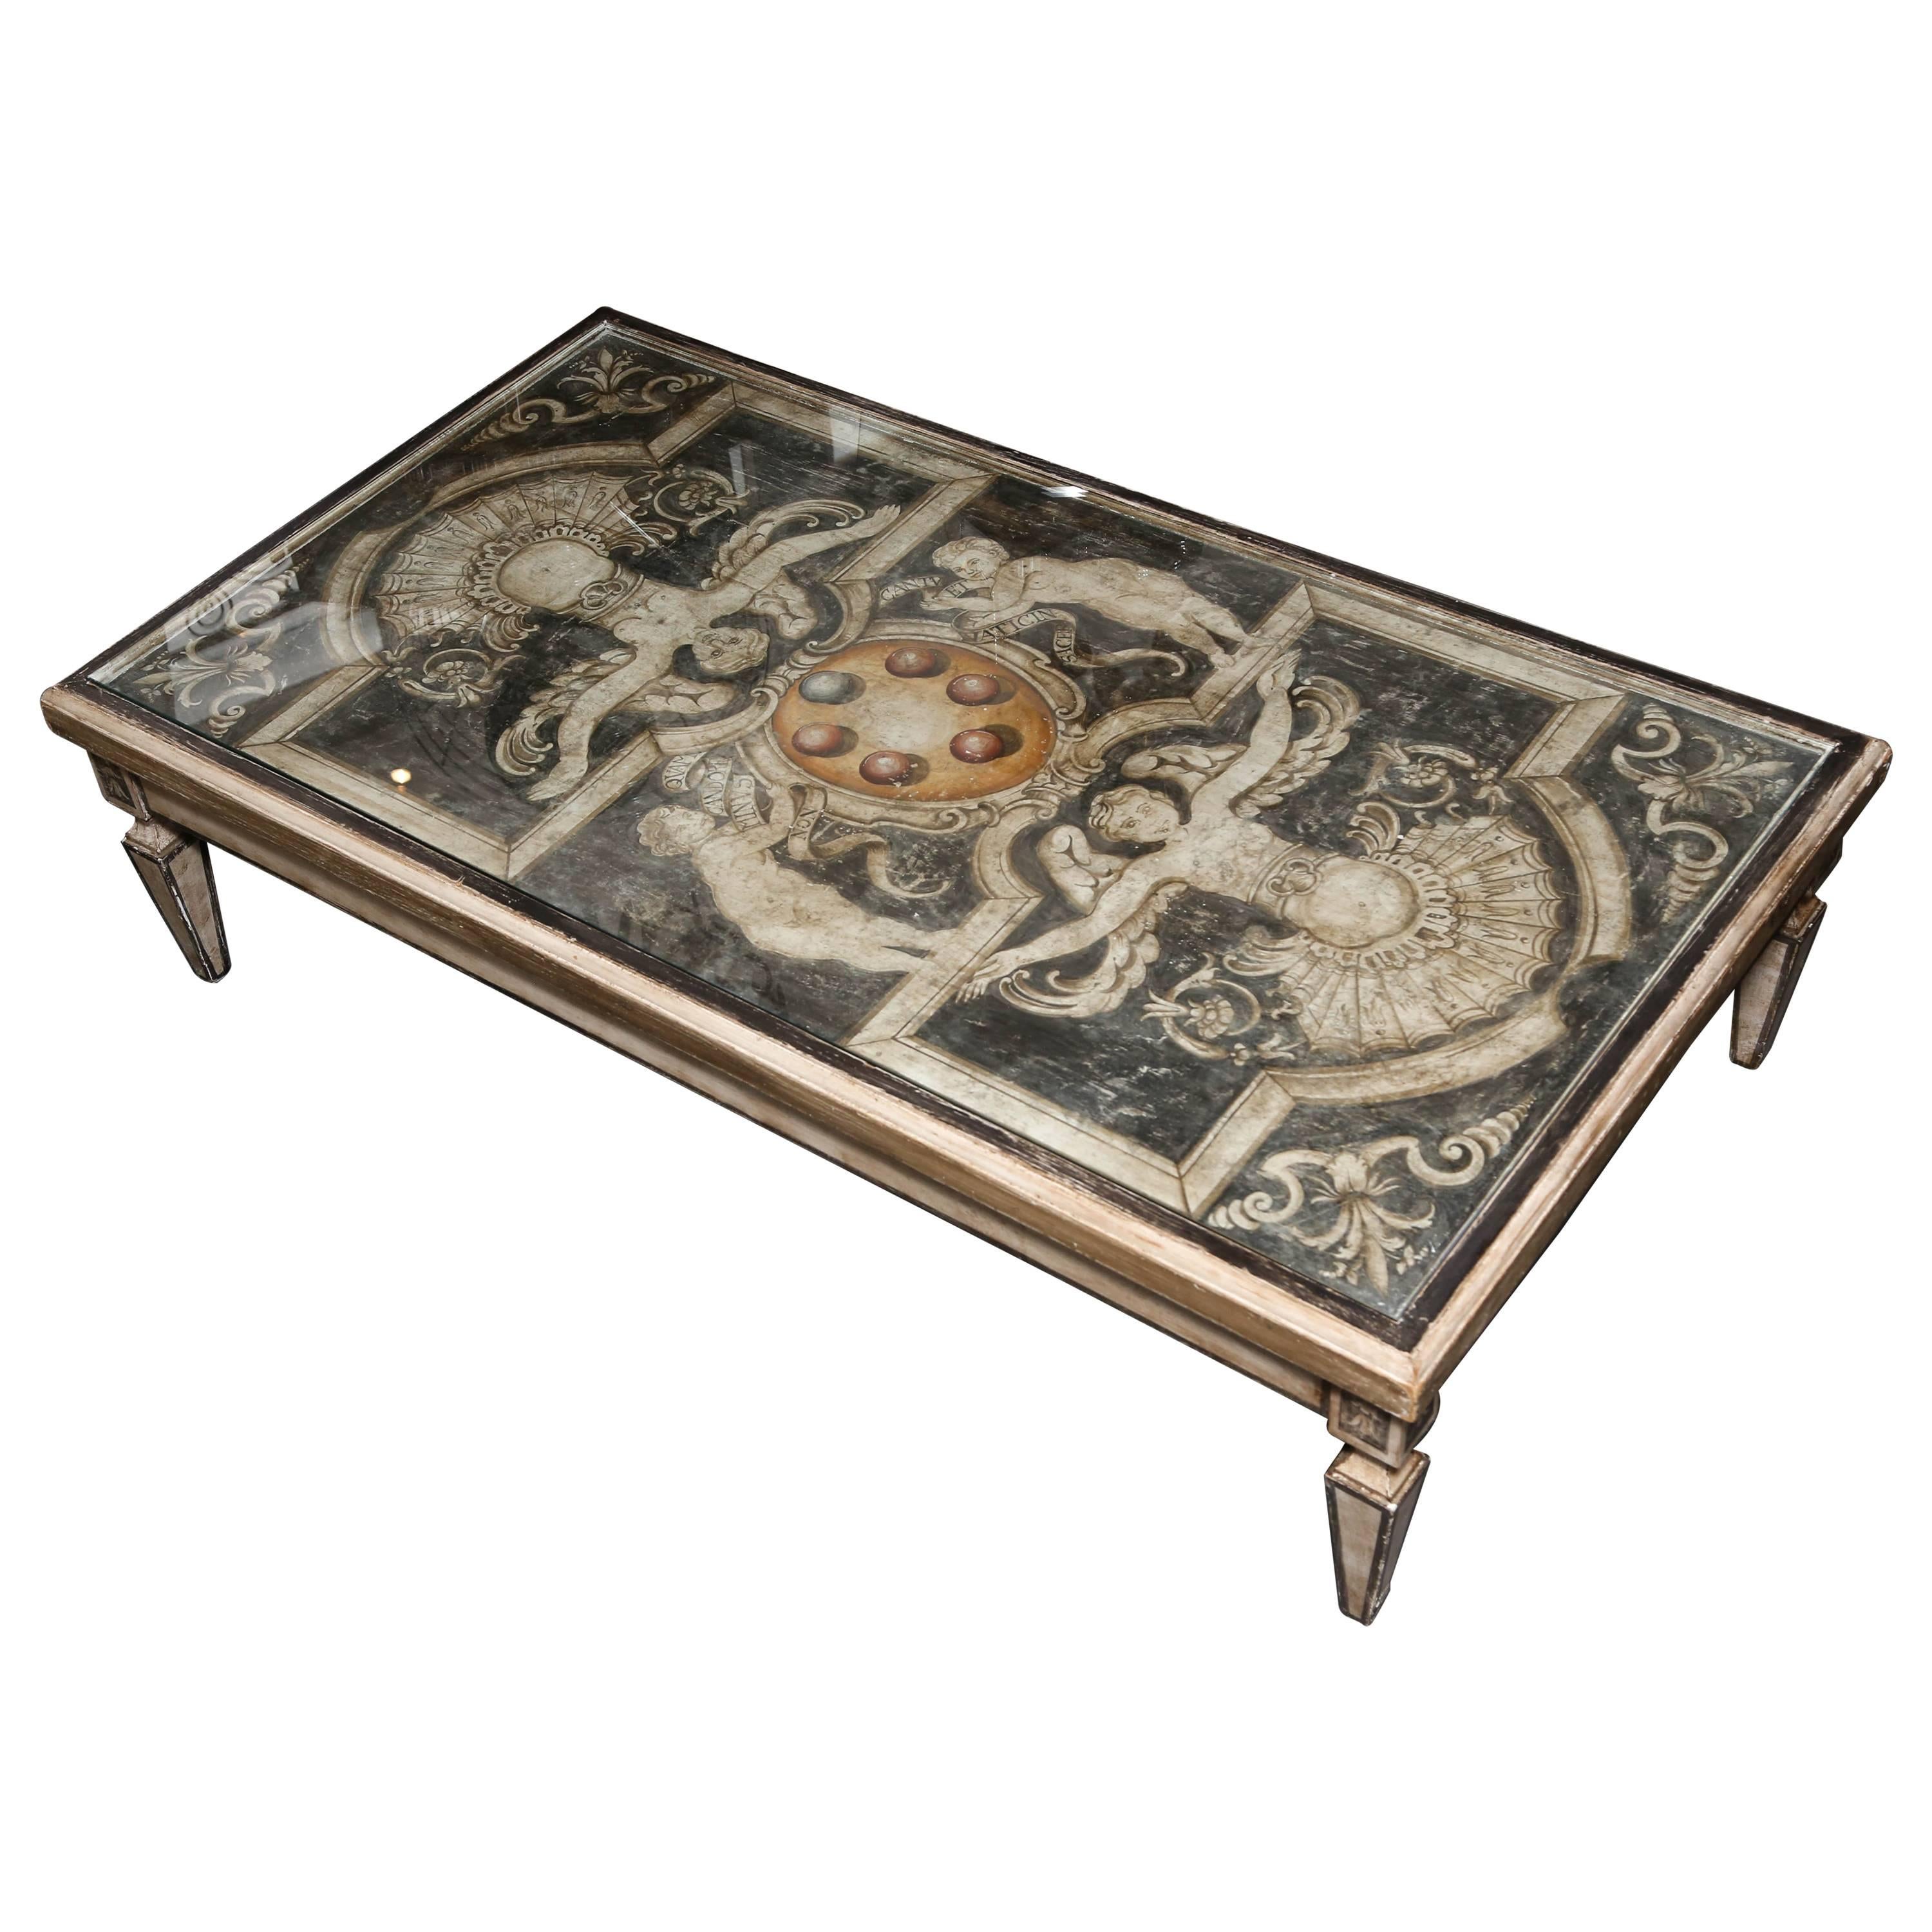 Superb Oversized 18th Century Italian Panel Mounted as a Coffee Table